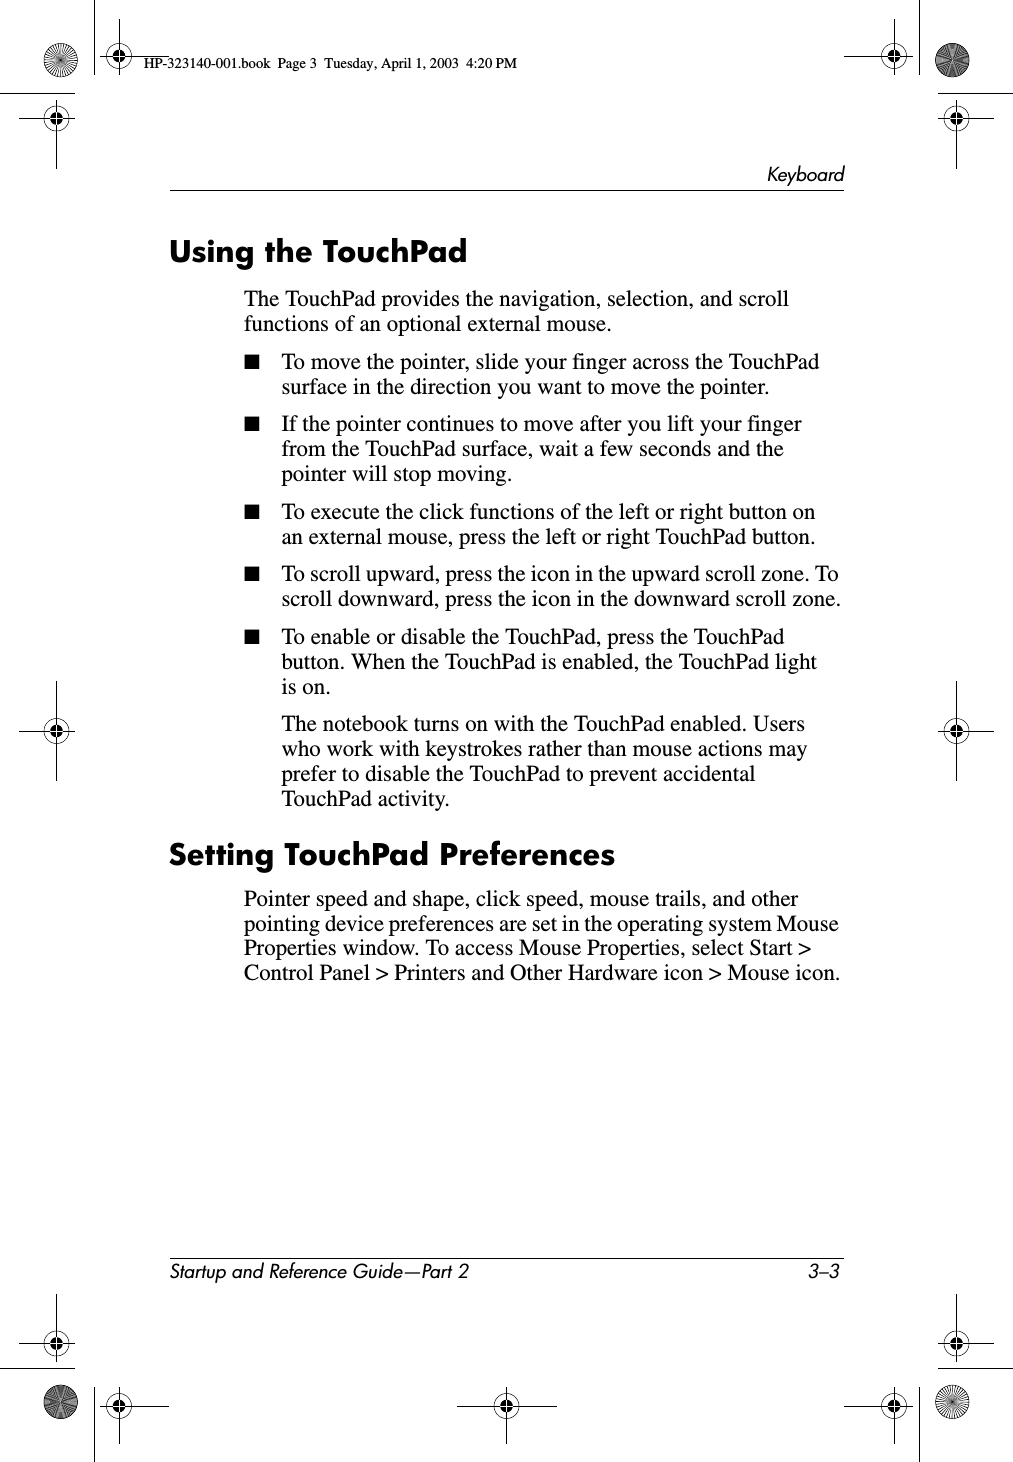 KeyboardStartup and Reference Guide—Part 2 3–3Using the TouchPadThe TouchPad provides the navigation, selection, and scroll functions of an optional external mouse.■To move the pointer, slide your finger across the TouchPad surface in the direction you want to move the pointer.■If the pointer continues to move after you lift your finger from the TouchPad surface, wait a few seconds and the pointer will stop moving.■To execute the click functions of the left or right button on an external mouse, press the left or right TouchPad button.■To scroll upward, press the icon in the upward scroll zone. To scroll downward, press the icon in the downward scroll zone.■To enable or disable the TouchPad, press the TouchPad button. When the TouchPad is enabled, the TouchPad light is on.The notebook turns on with the TouchPad enabled. Users who work with keystrokes rather than mouse actions may prefer to disable the TouchPad to prevent accidental TouchPad activity.Setting TouchPad PreferencesPointer speed and shape, click speed, mouse trails, and other pointing device preferences are set in the operating system Mouse Properties window. To access Mouse Properties, select Start &gt; Control Panel &gt; Printers and Other Hardware icon &gt; Mouse icon.HP-323140-001.book  Page 3  Tuesday, April 1, 2003  4:20 PM